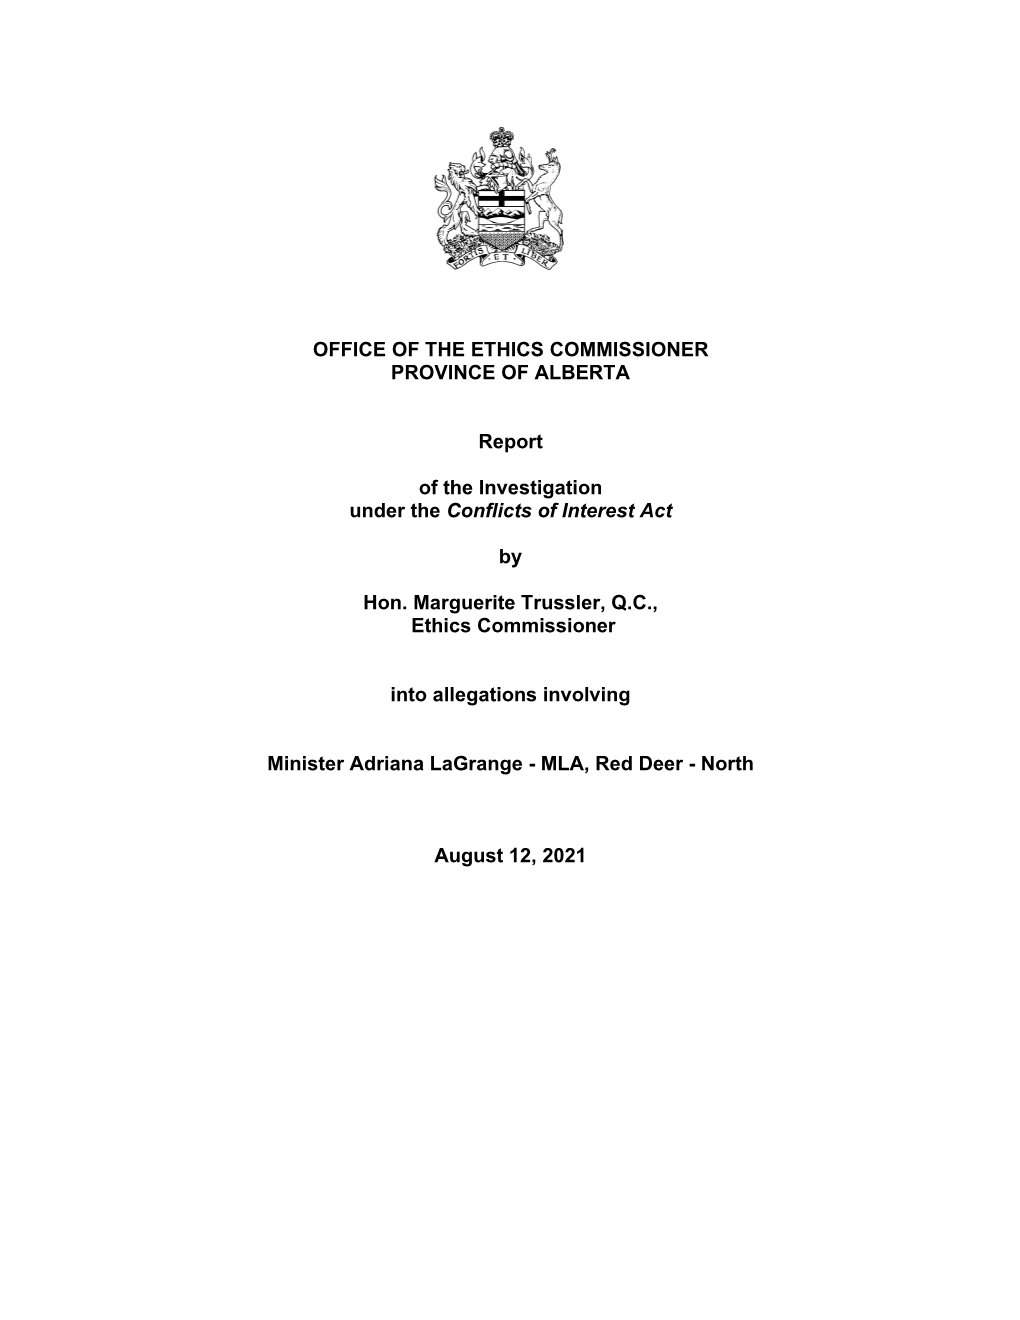 Office of the Ethics Commissioner Province of Alberta